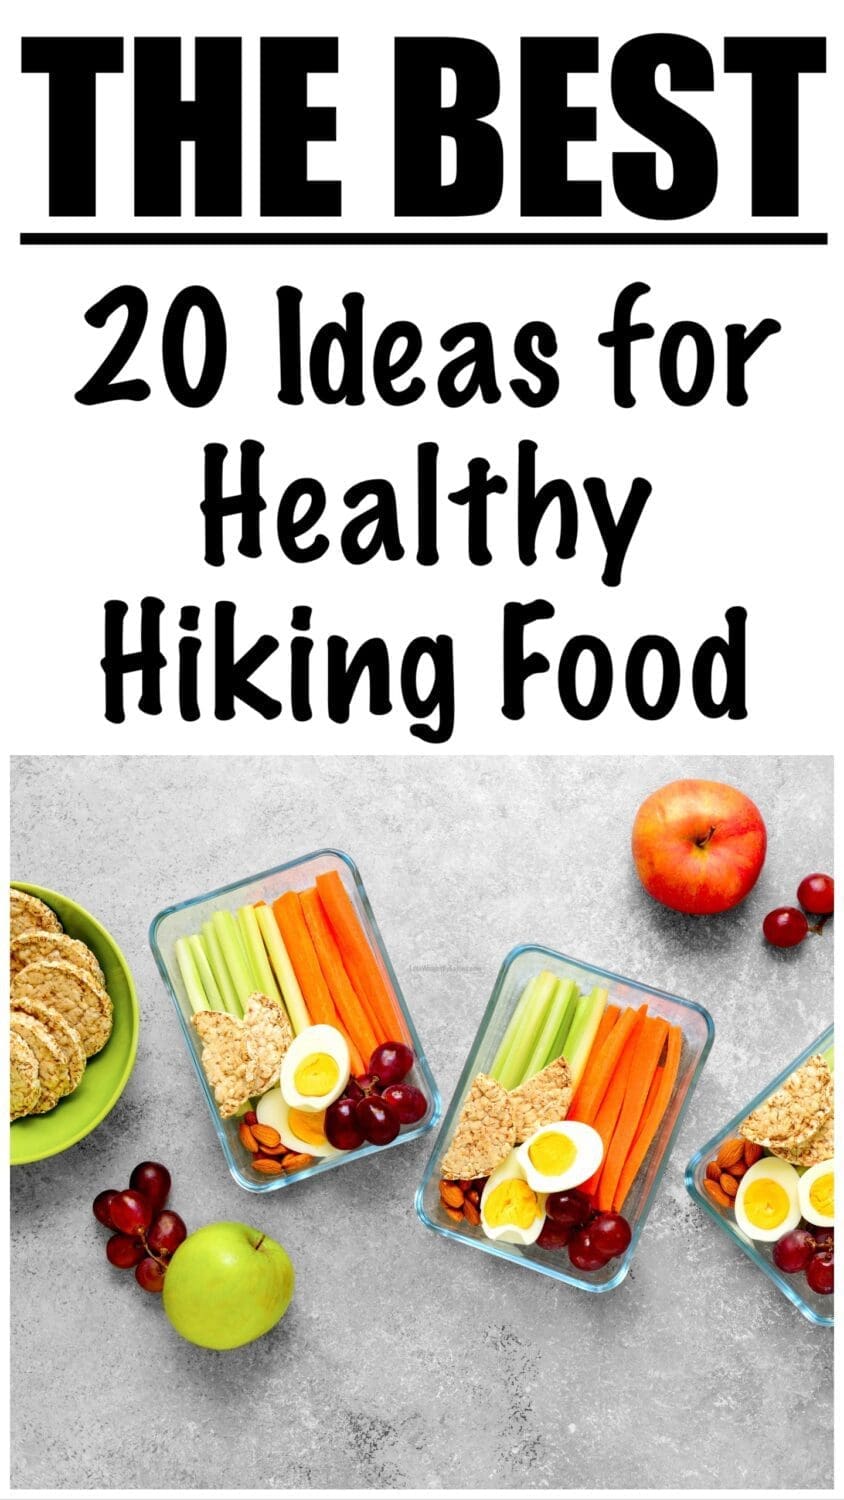 20 Ideas for Healthy Hiking Food